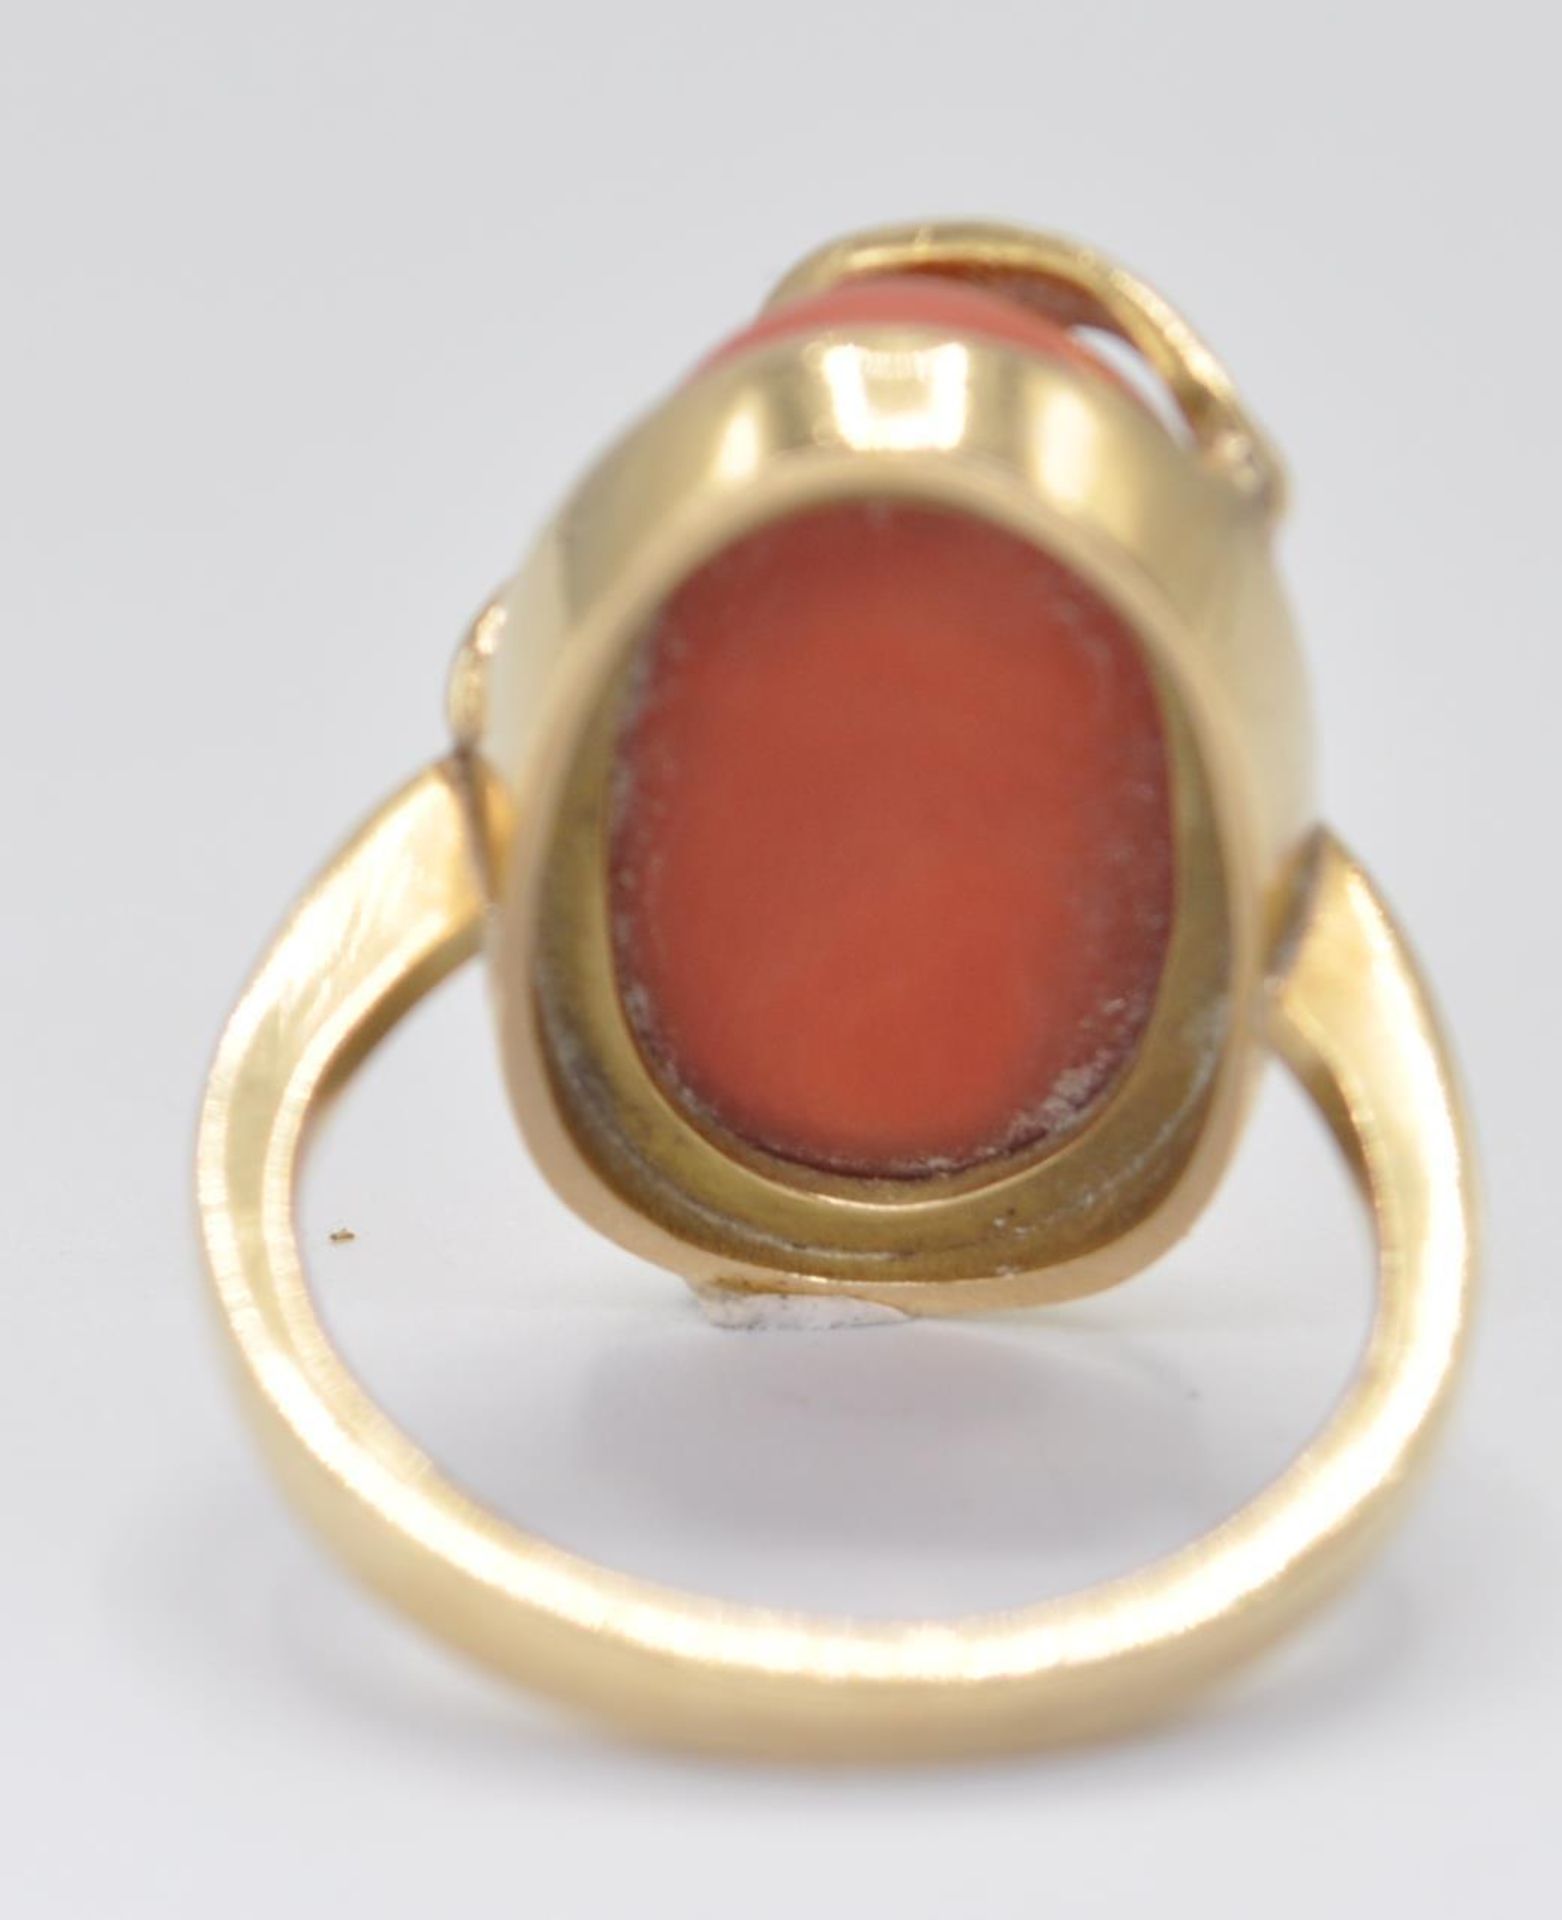 18CT GOLD CORAL AND DIAMOND COCKTAIL RING - Image 5 of 7